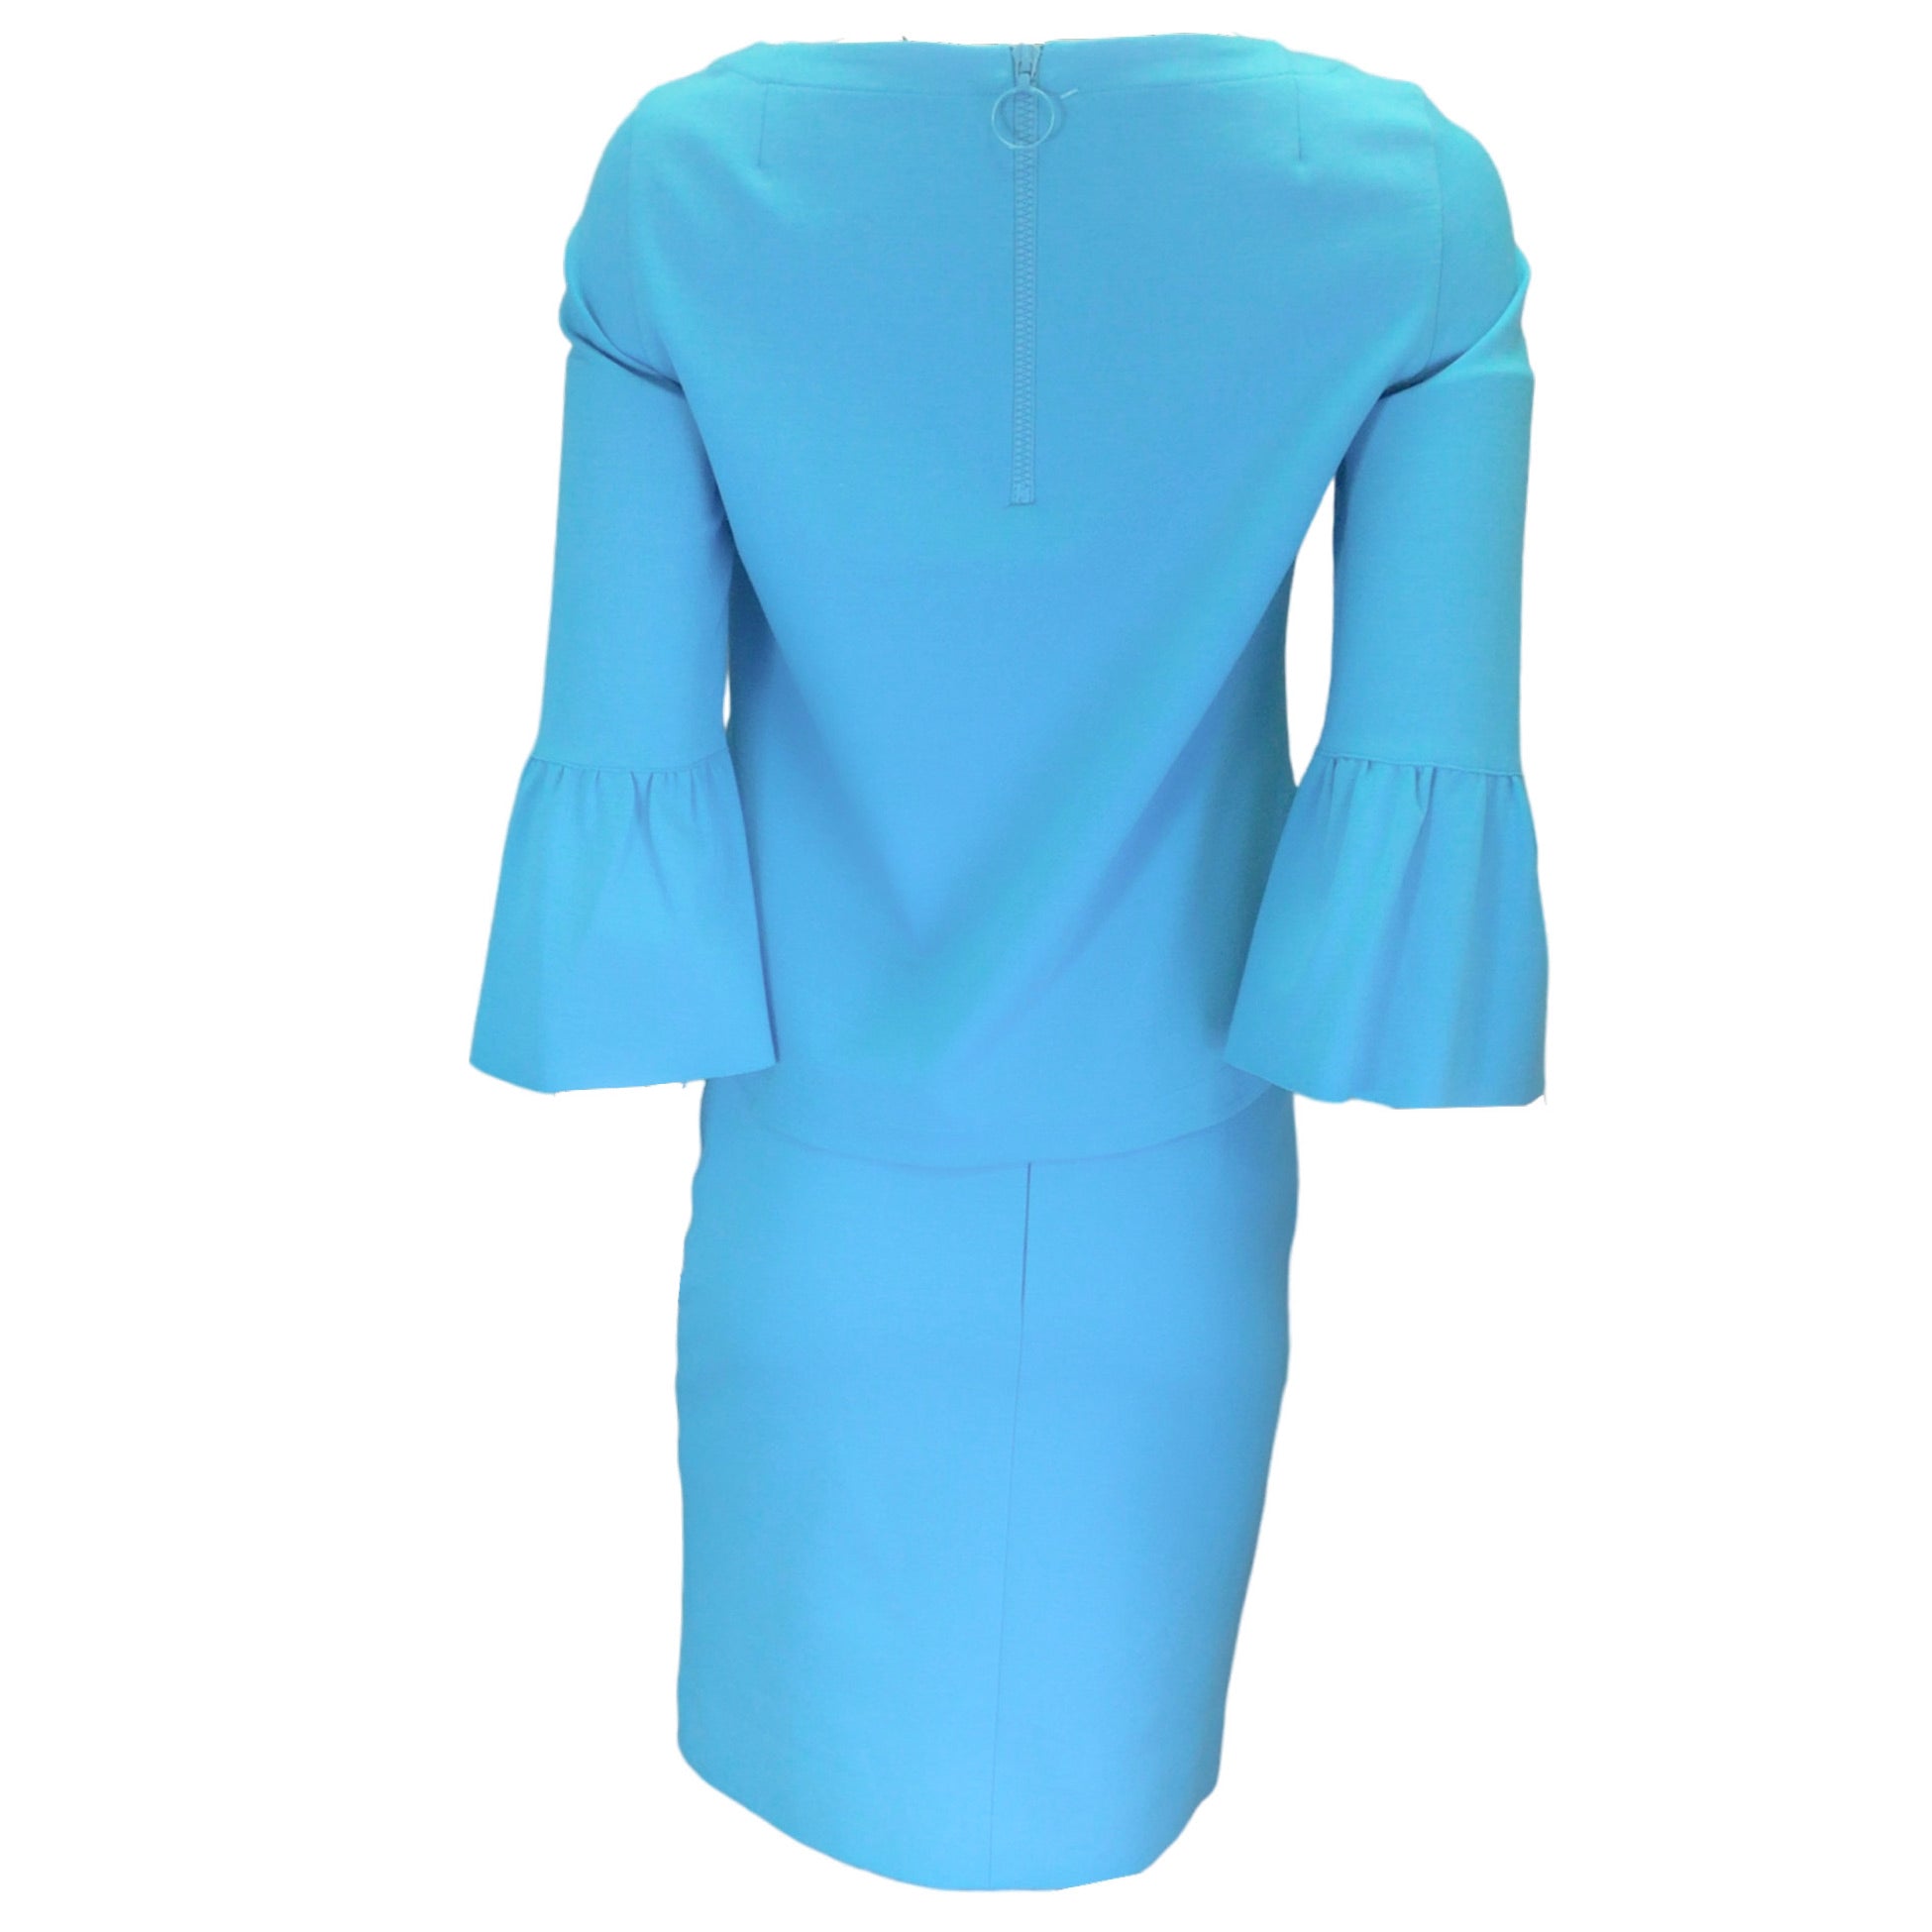 Akris Punto Turquoise Stretch Knit Top and Skirt Two-Piece Set